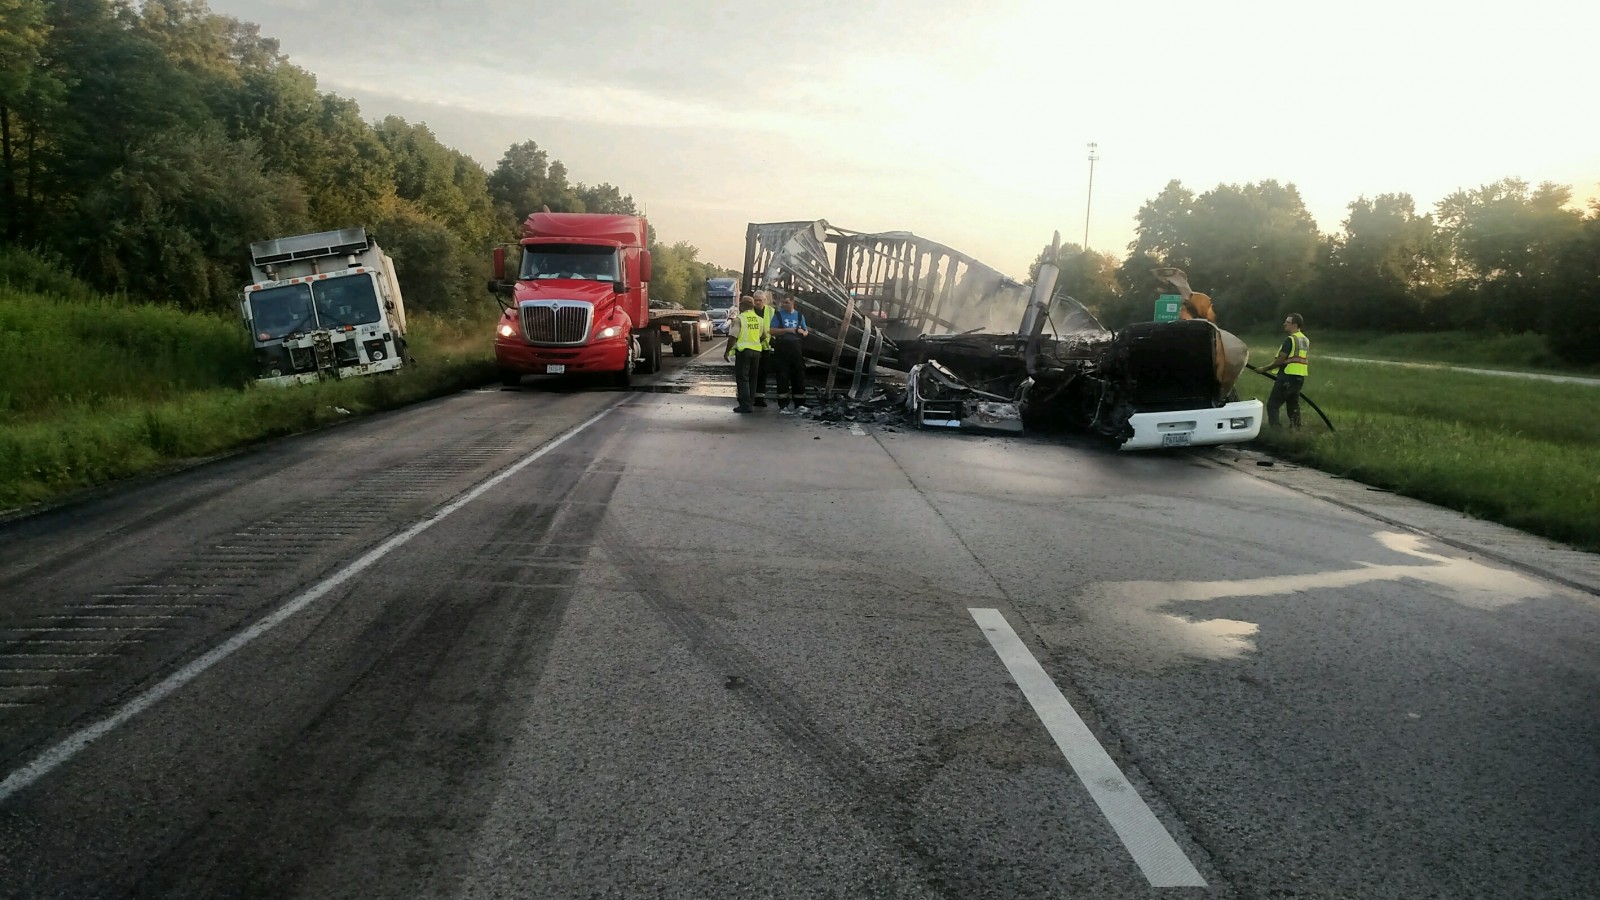 Wreckage from and earlier crash on I-57. Use caution when passing on the highway!